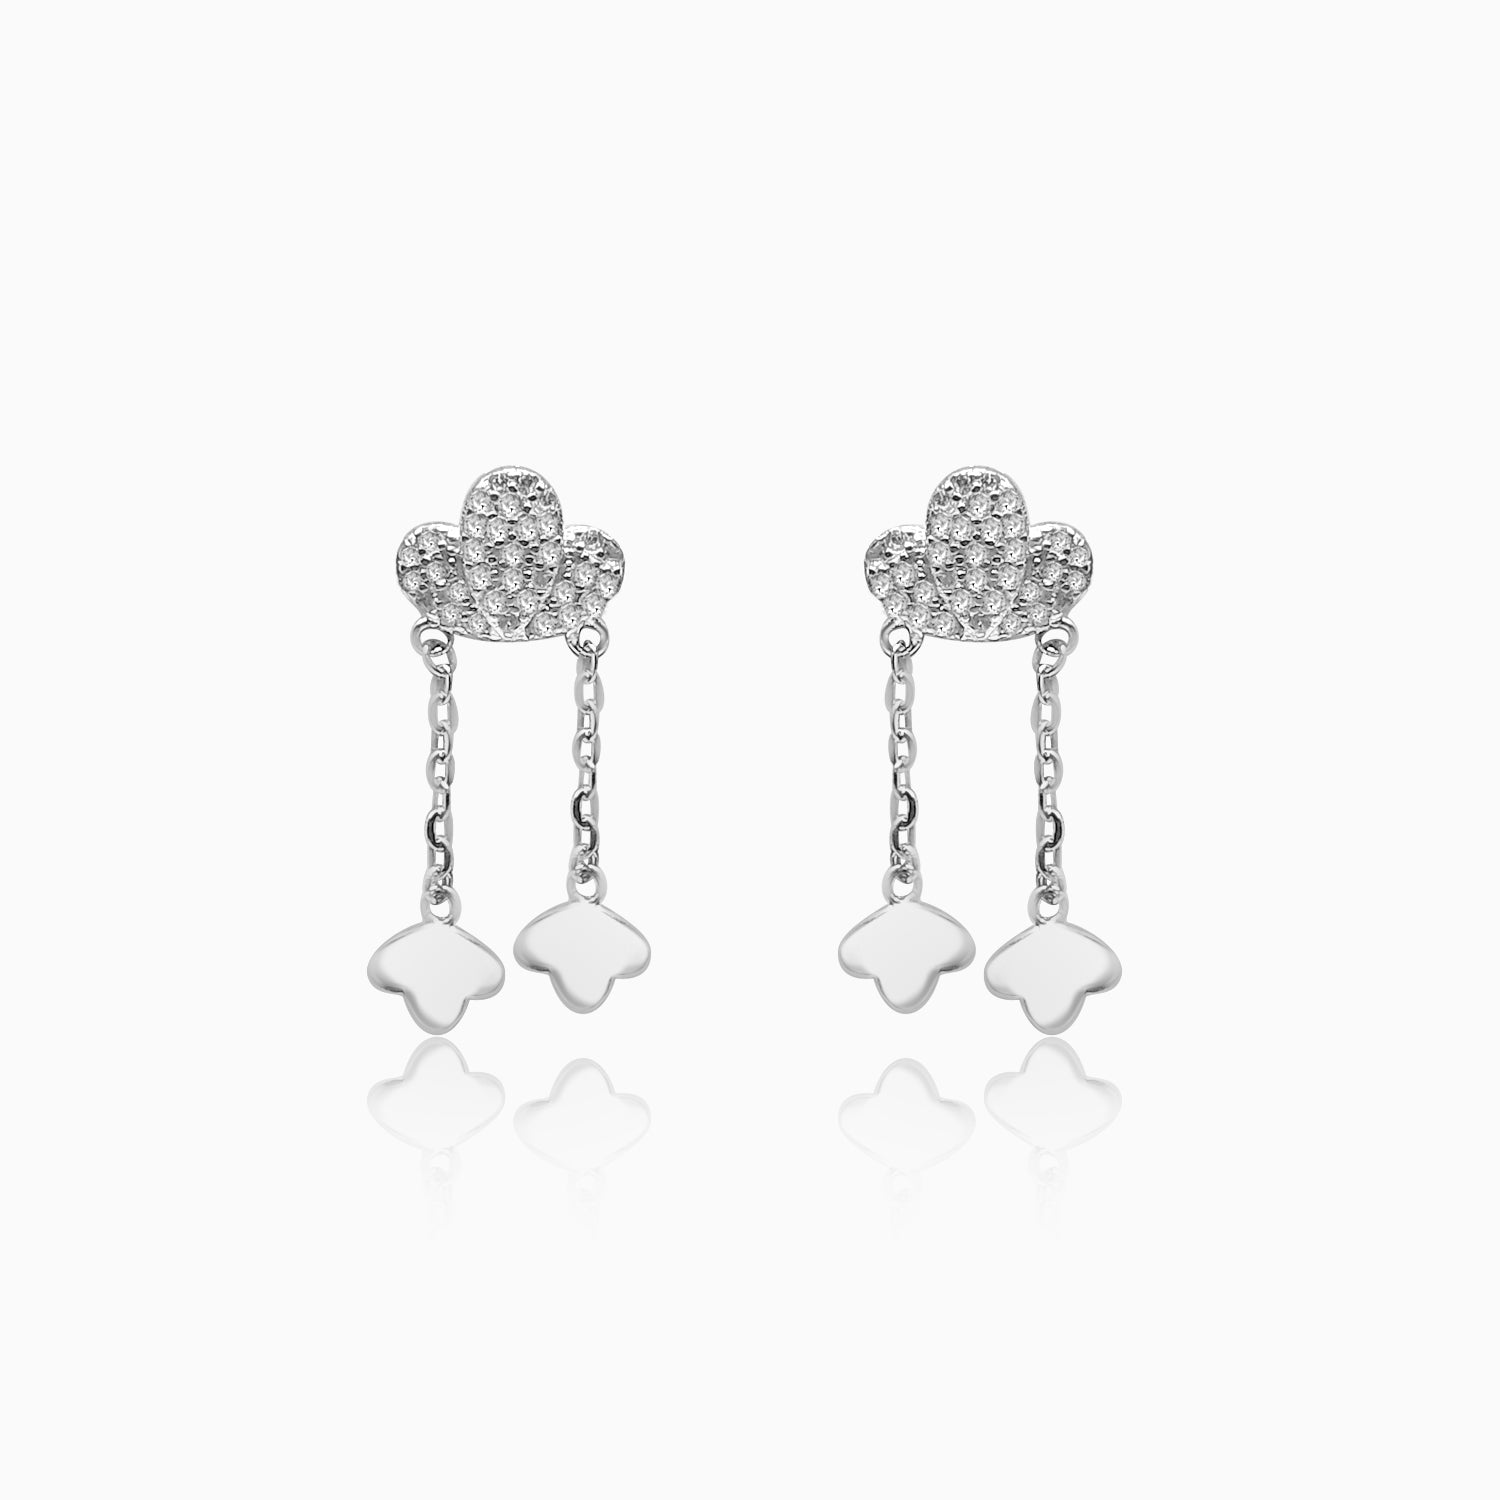 Silver Sparkling Shrub with Danglers Earrings